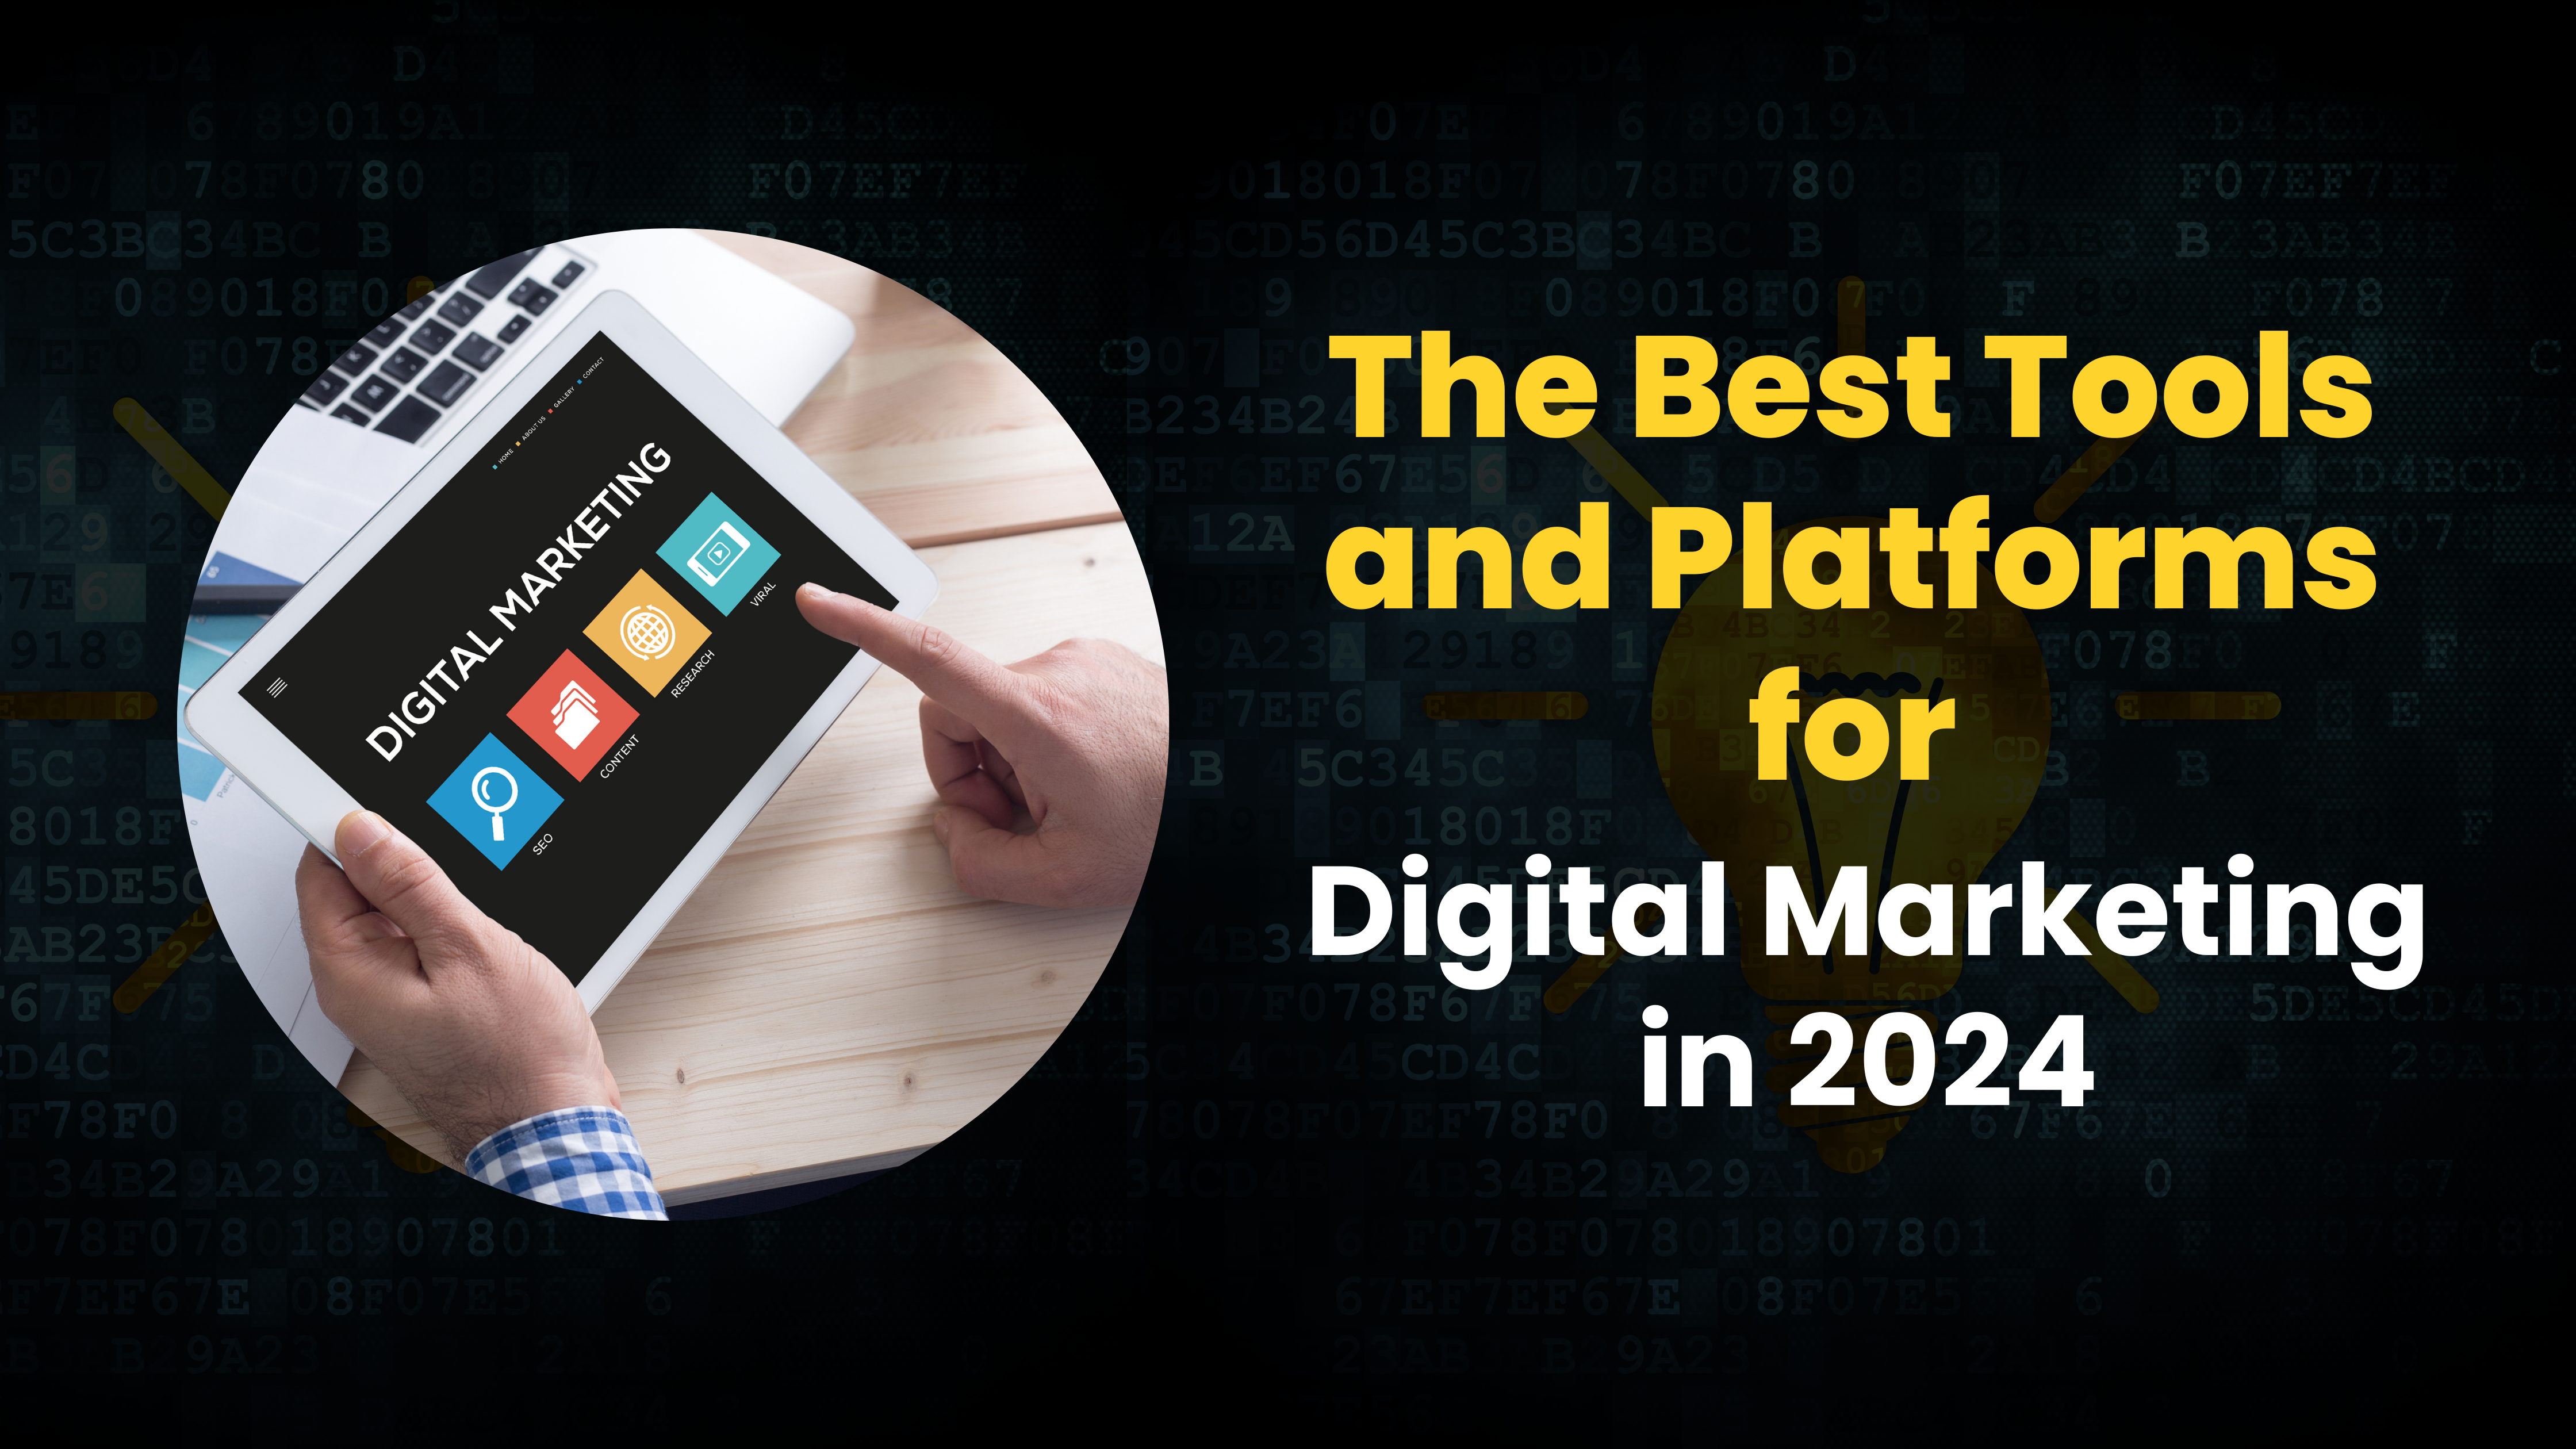 The Best Tools and Platforms for Digital Marketing in 2024